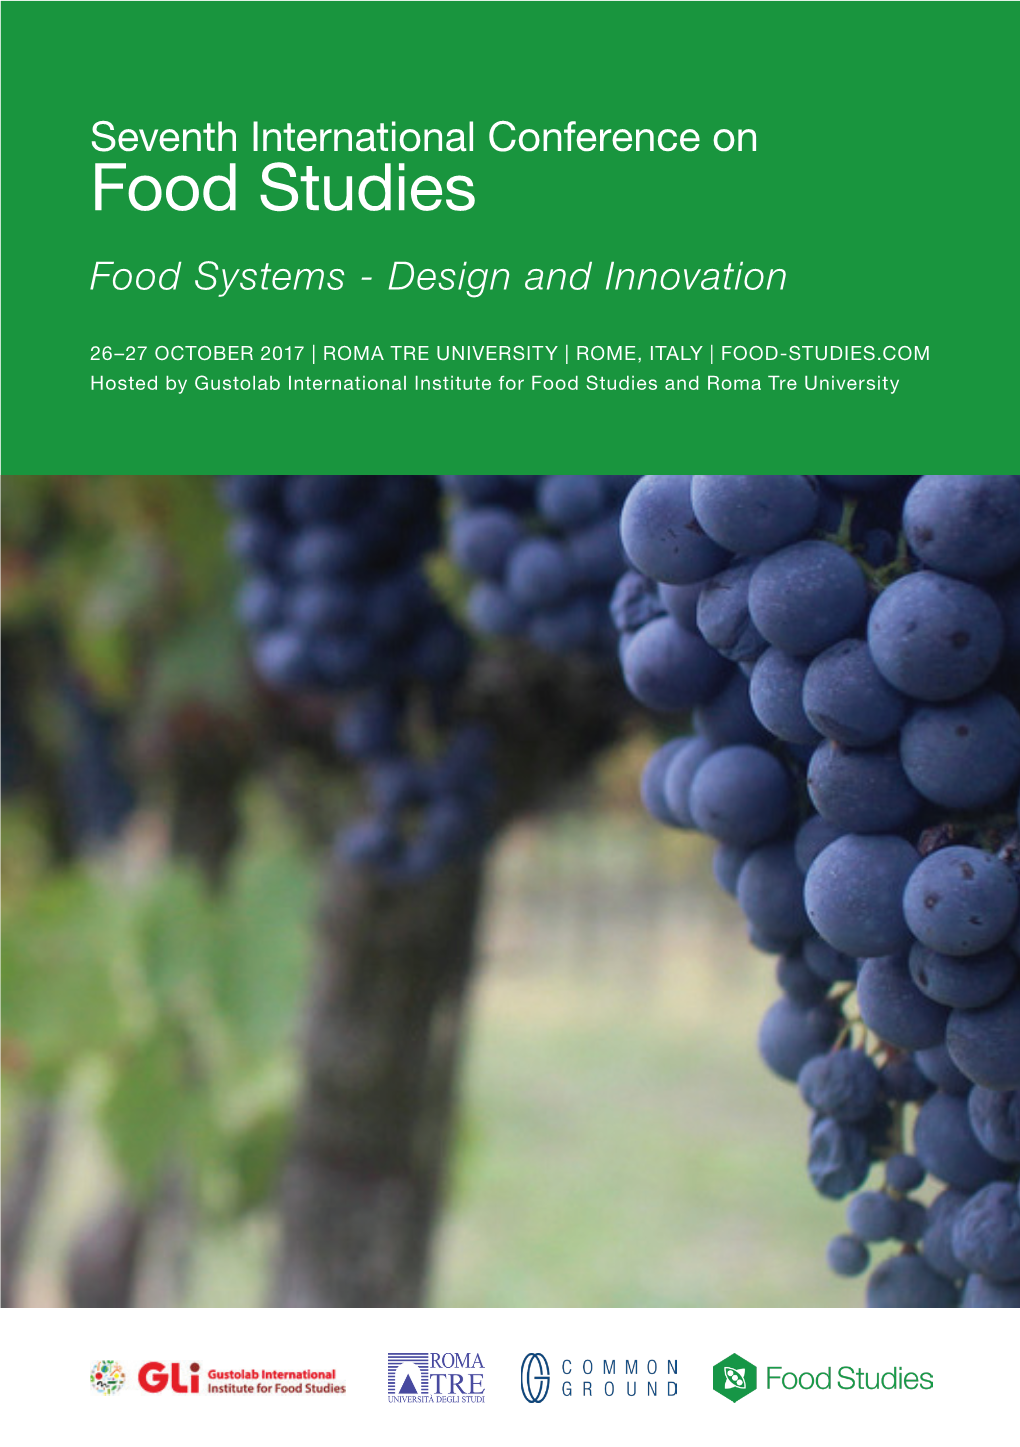 Food Studies Food Systems - Design and Innovation